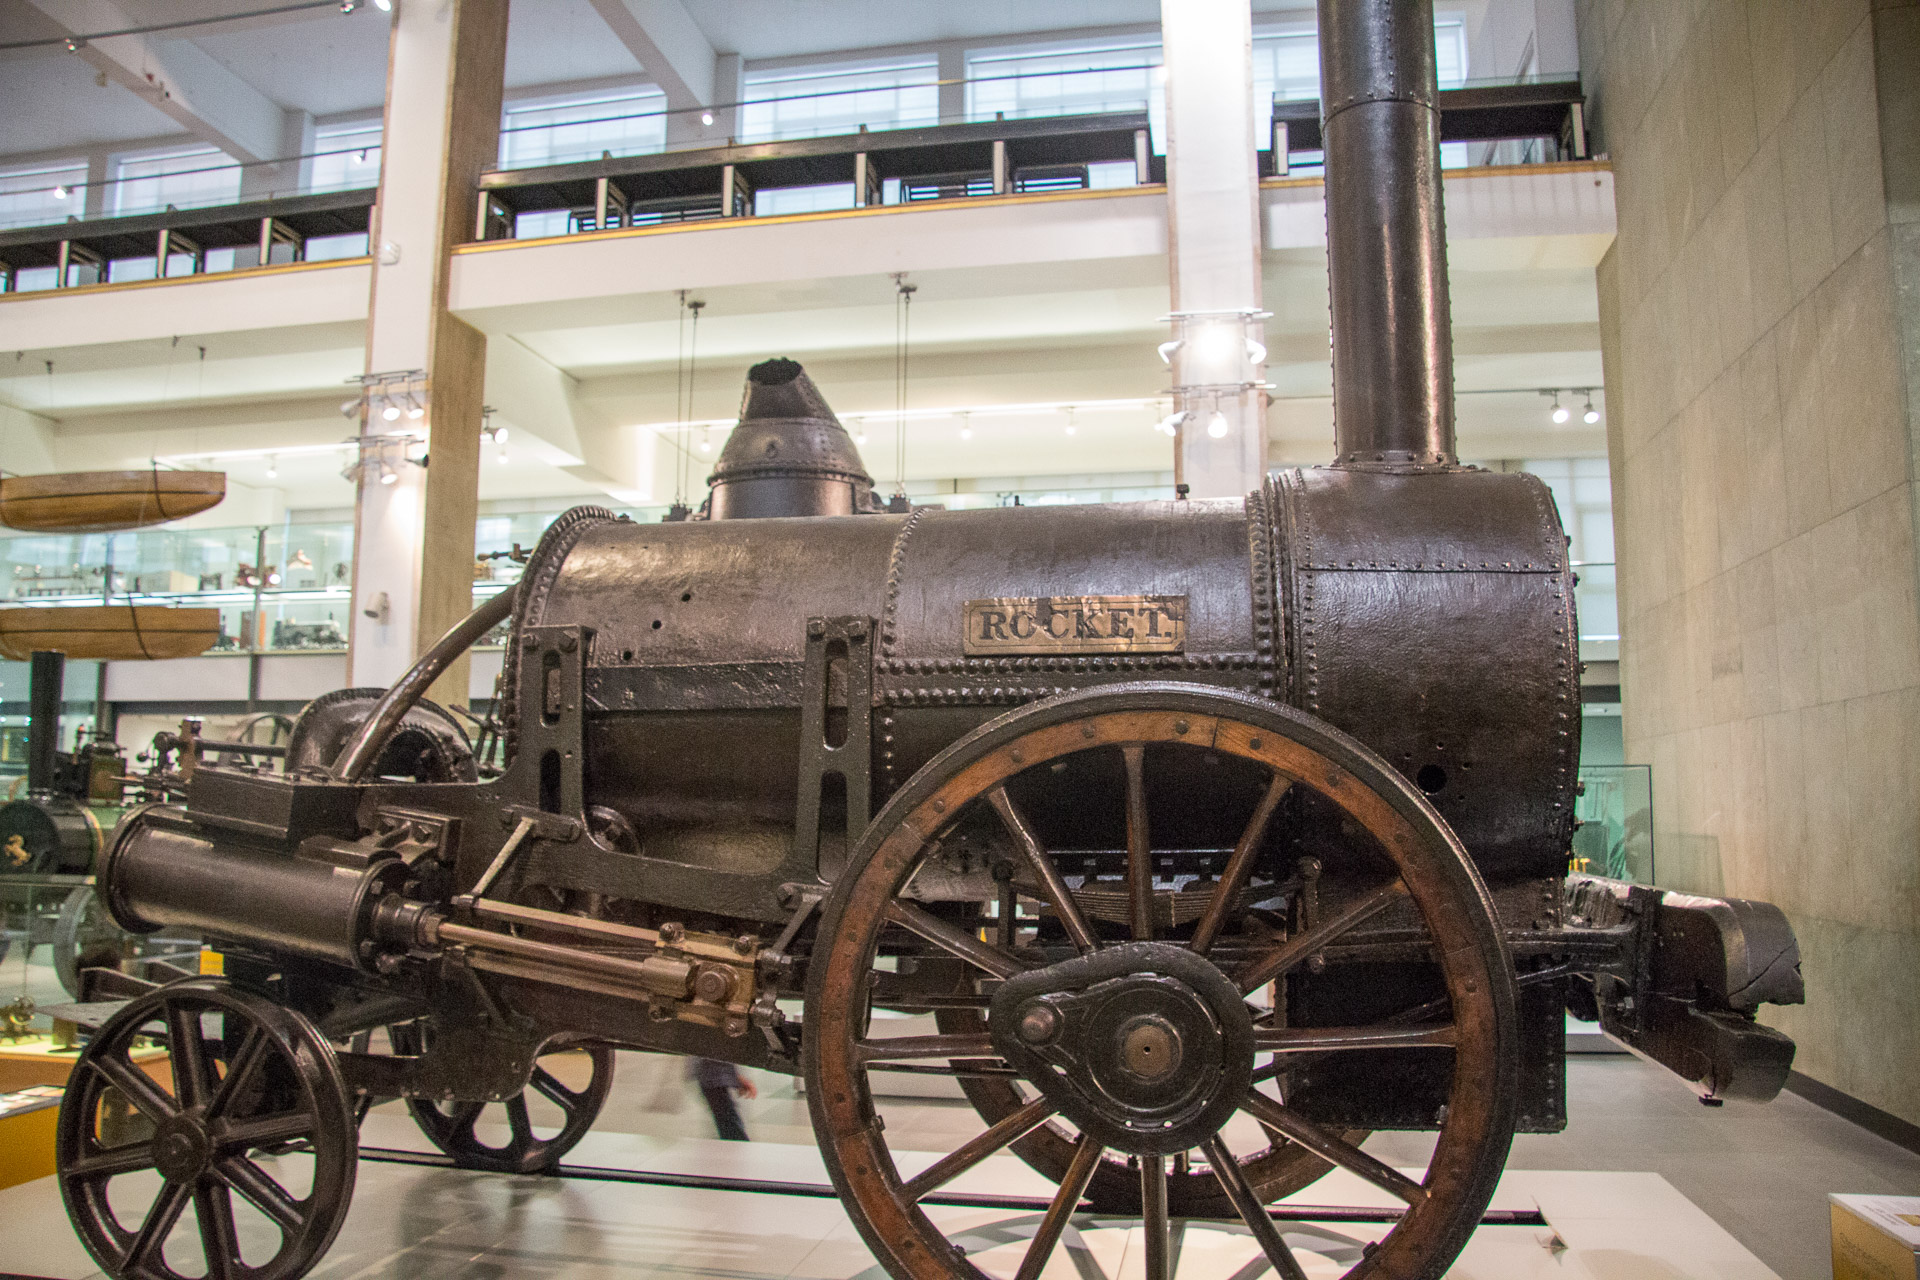 Stephenson's Rocket Locomotive at the Science Museum in London